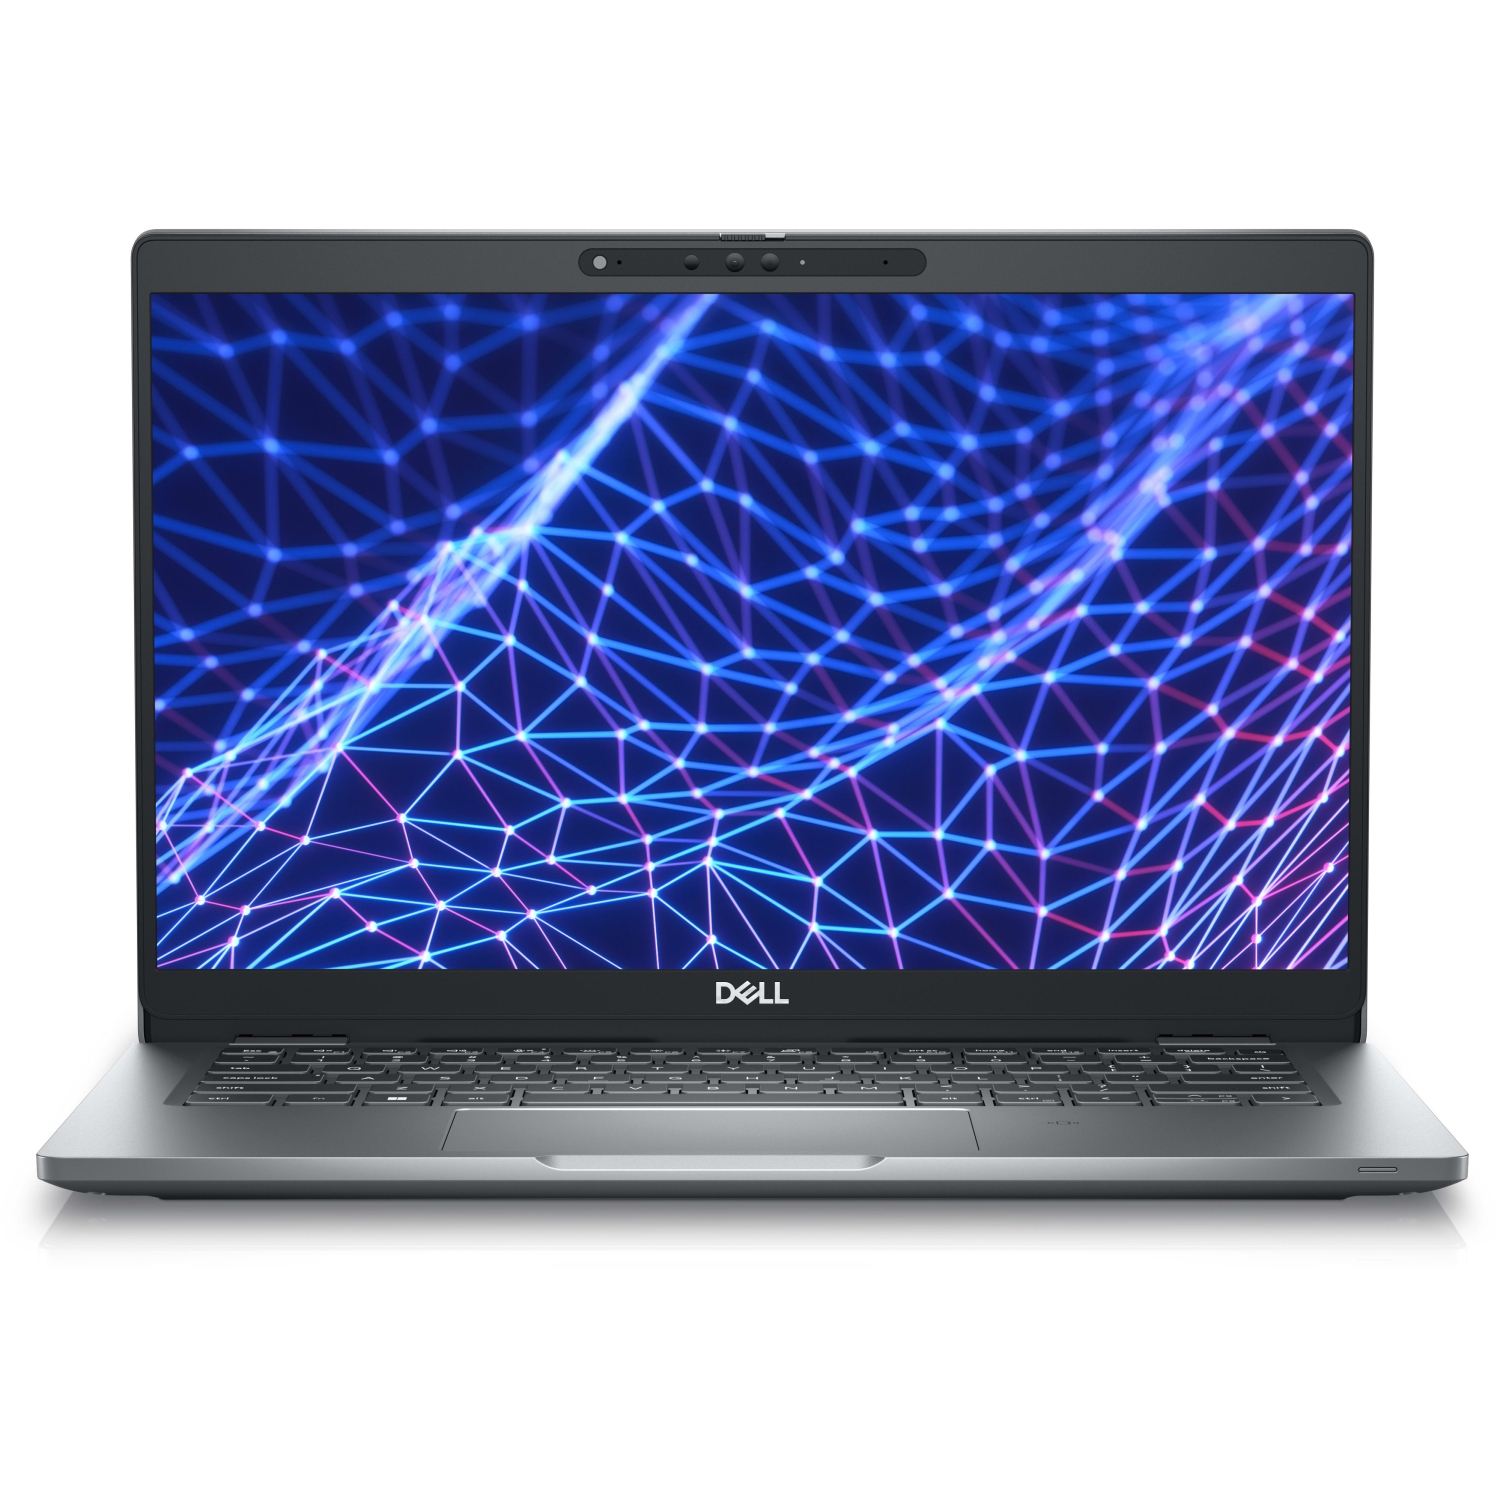 Dell Latitude 5000 5330 Laptop (2022) | 13.3" FHD | Core i5 - 512GB SSD - 16GB RAM | 10 Cores @ 4.4 GHz - 12th Gen CPU Certified Refurbished